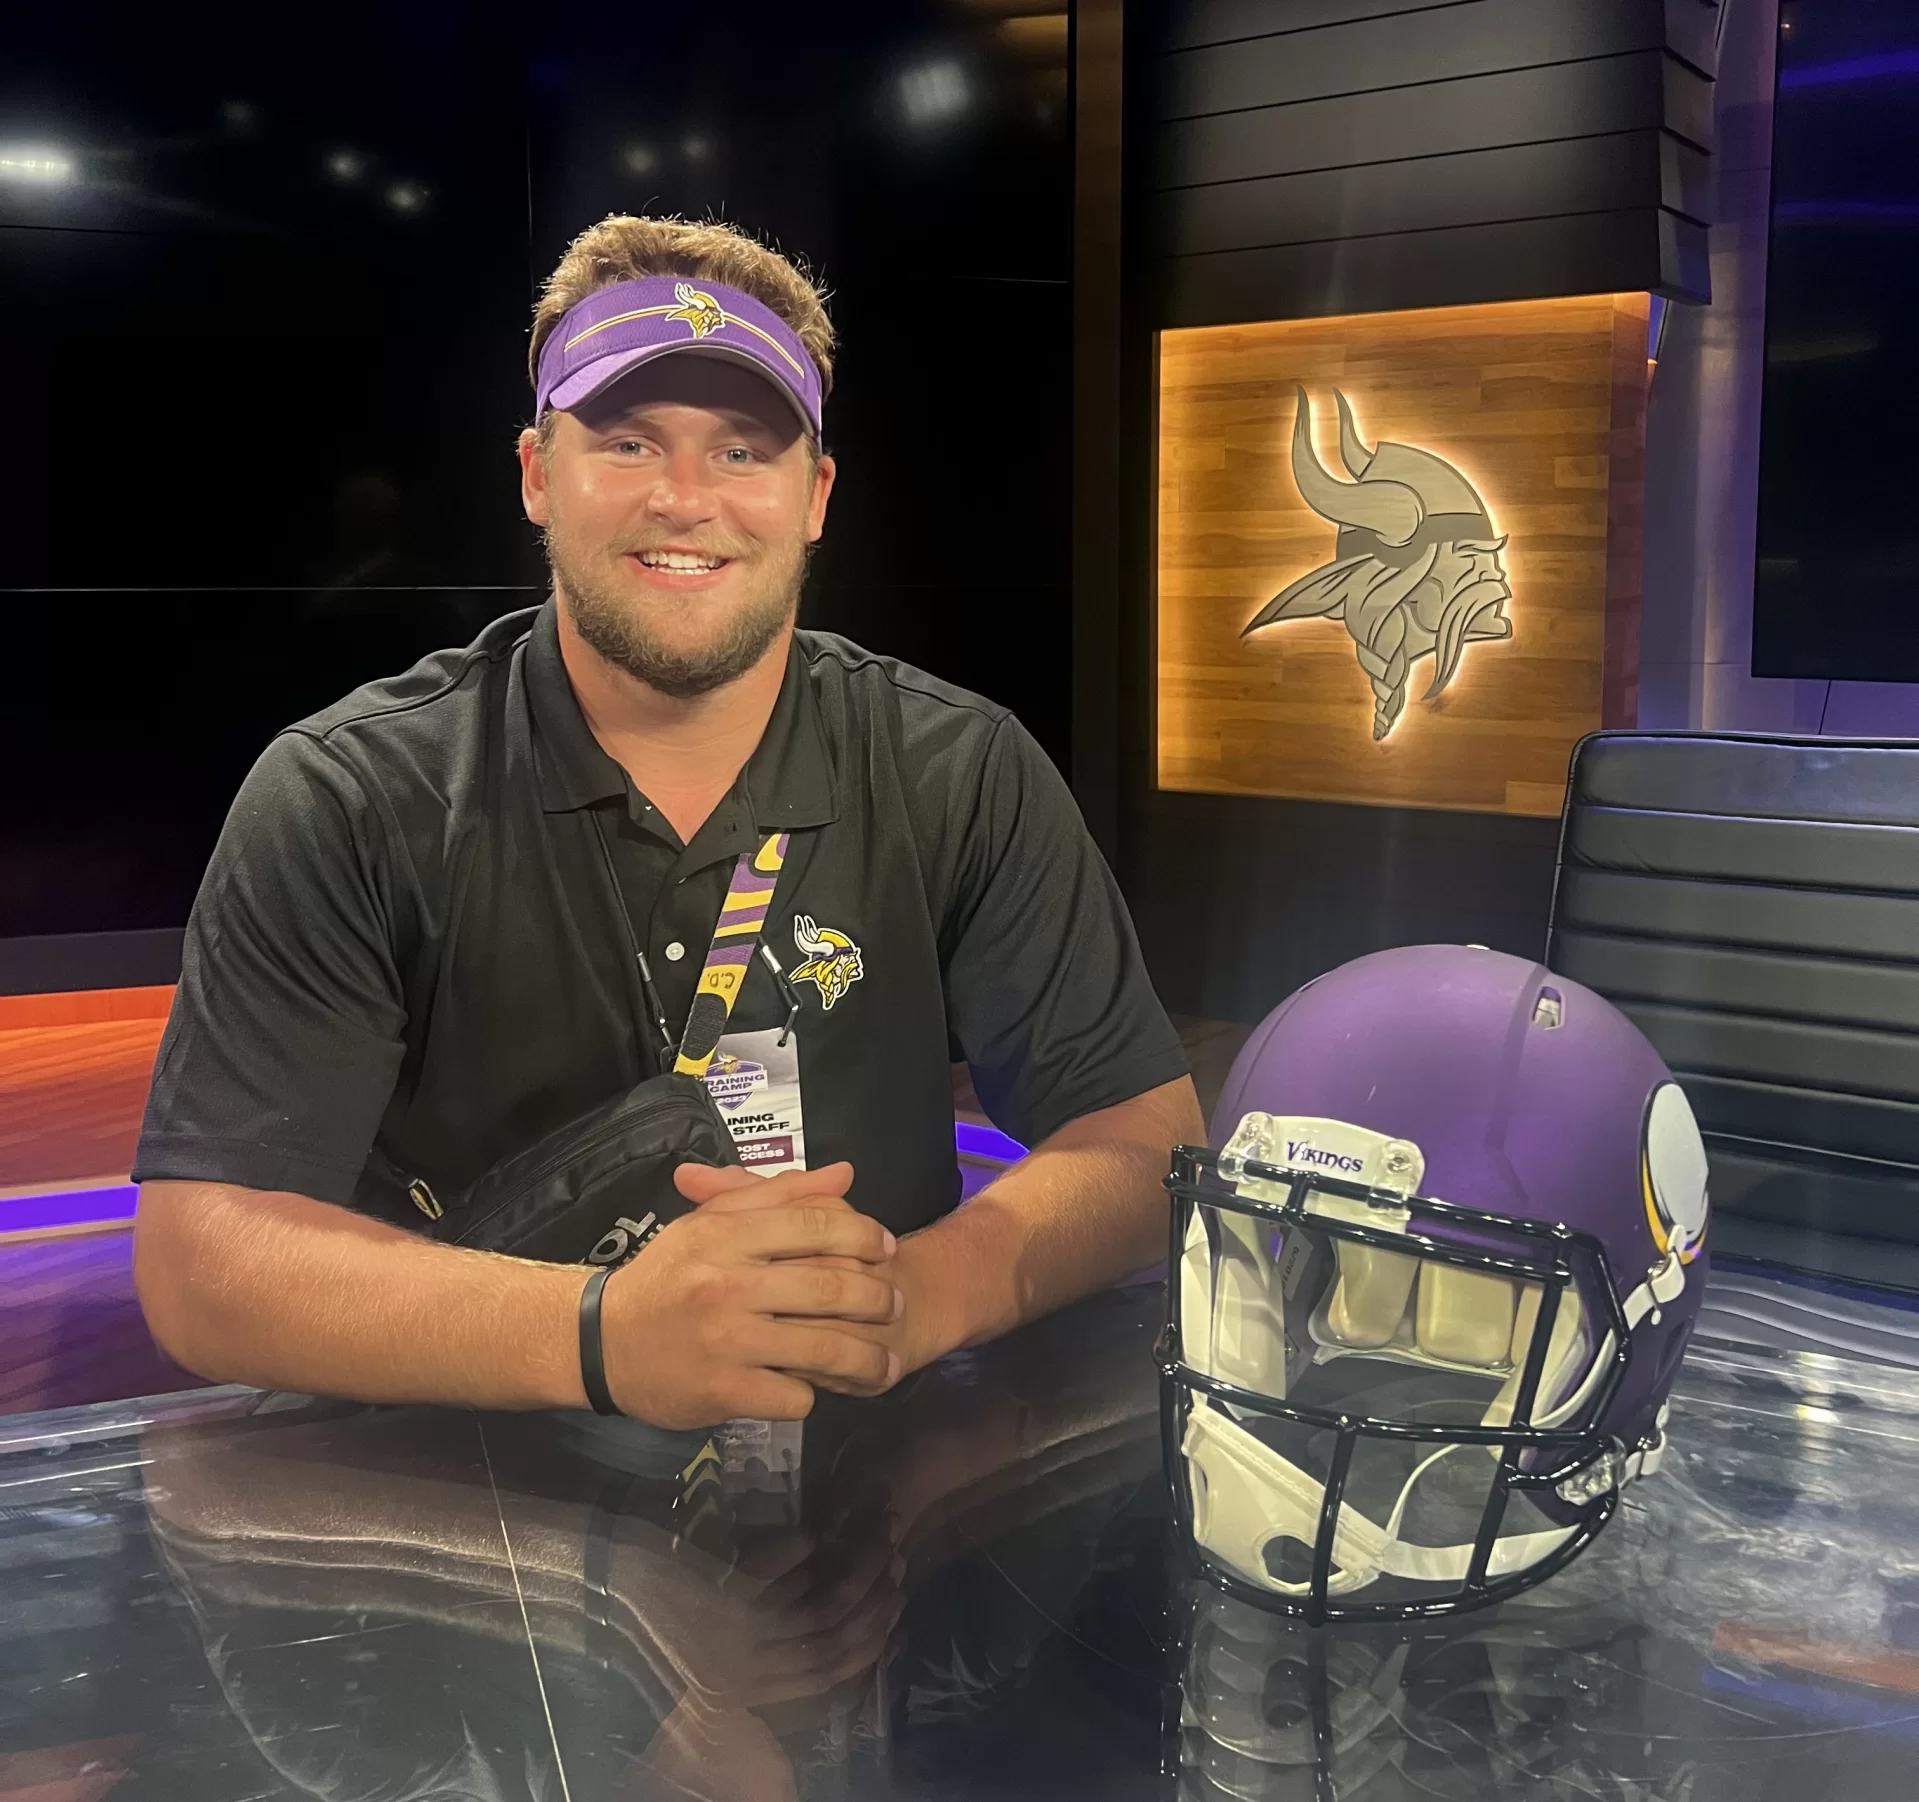 Cole De Magistris ’24, an economics and rhetoric, film, and screen studies double major from Emerson, N.J.


He had a purposeful work internship during August 2023 with the Minnesota Vikings training facility in Eagan, Minn. He was photographed here on Aug. 21, 2023.


Work: Supporting marketing, fan engagement, and guest services initiatives included with Fan Village, the Vikings’ fan experience program during training camp.